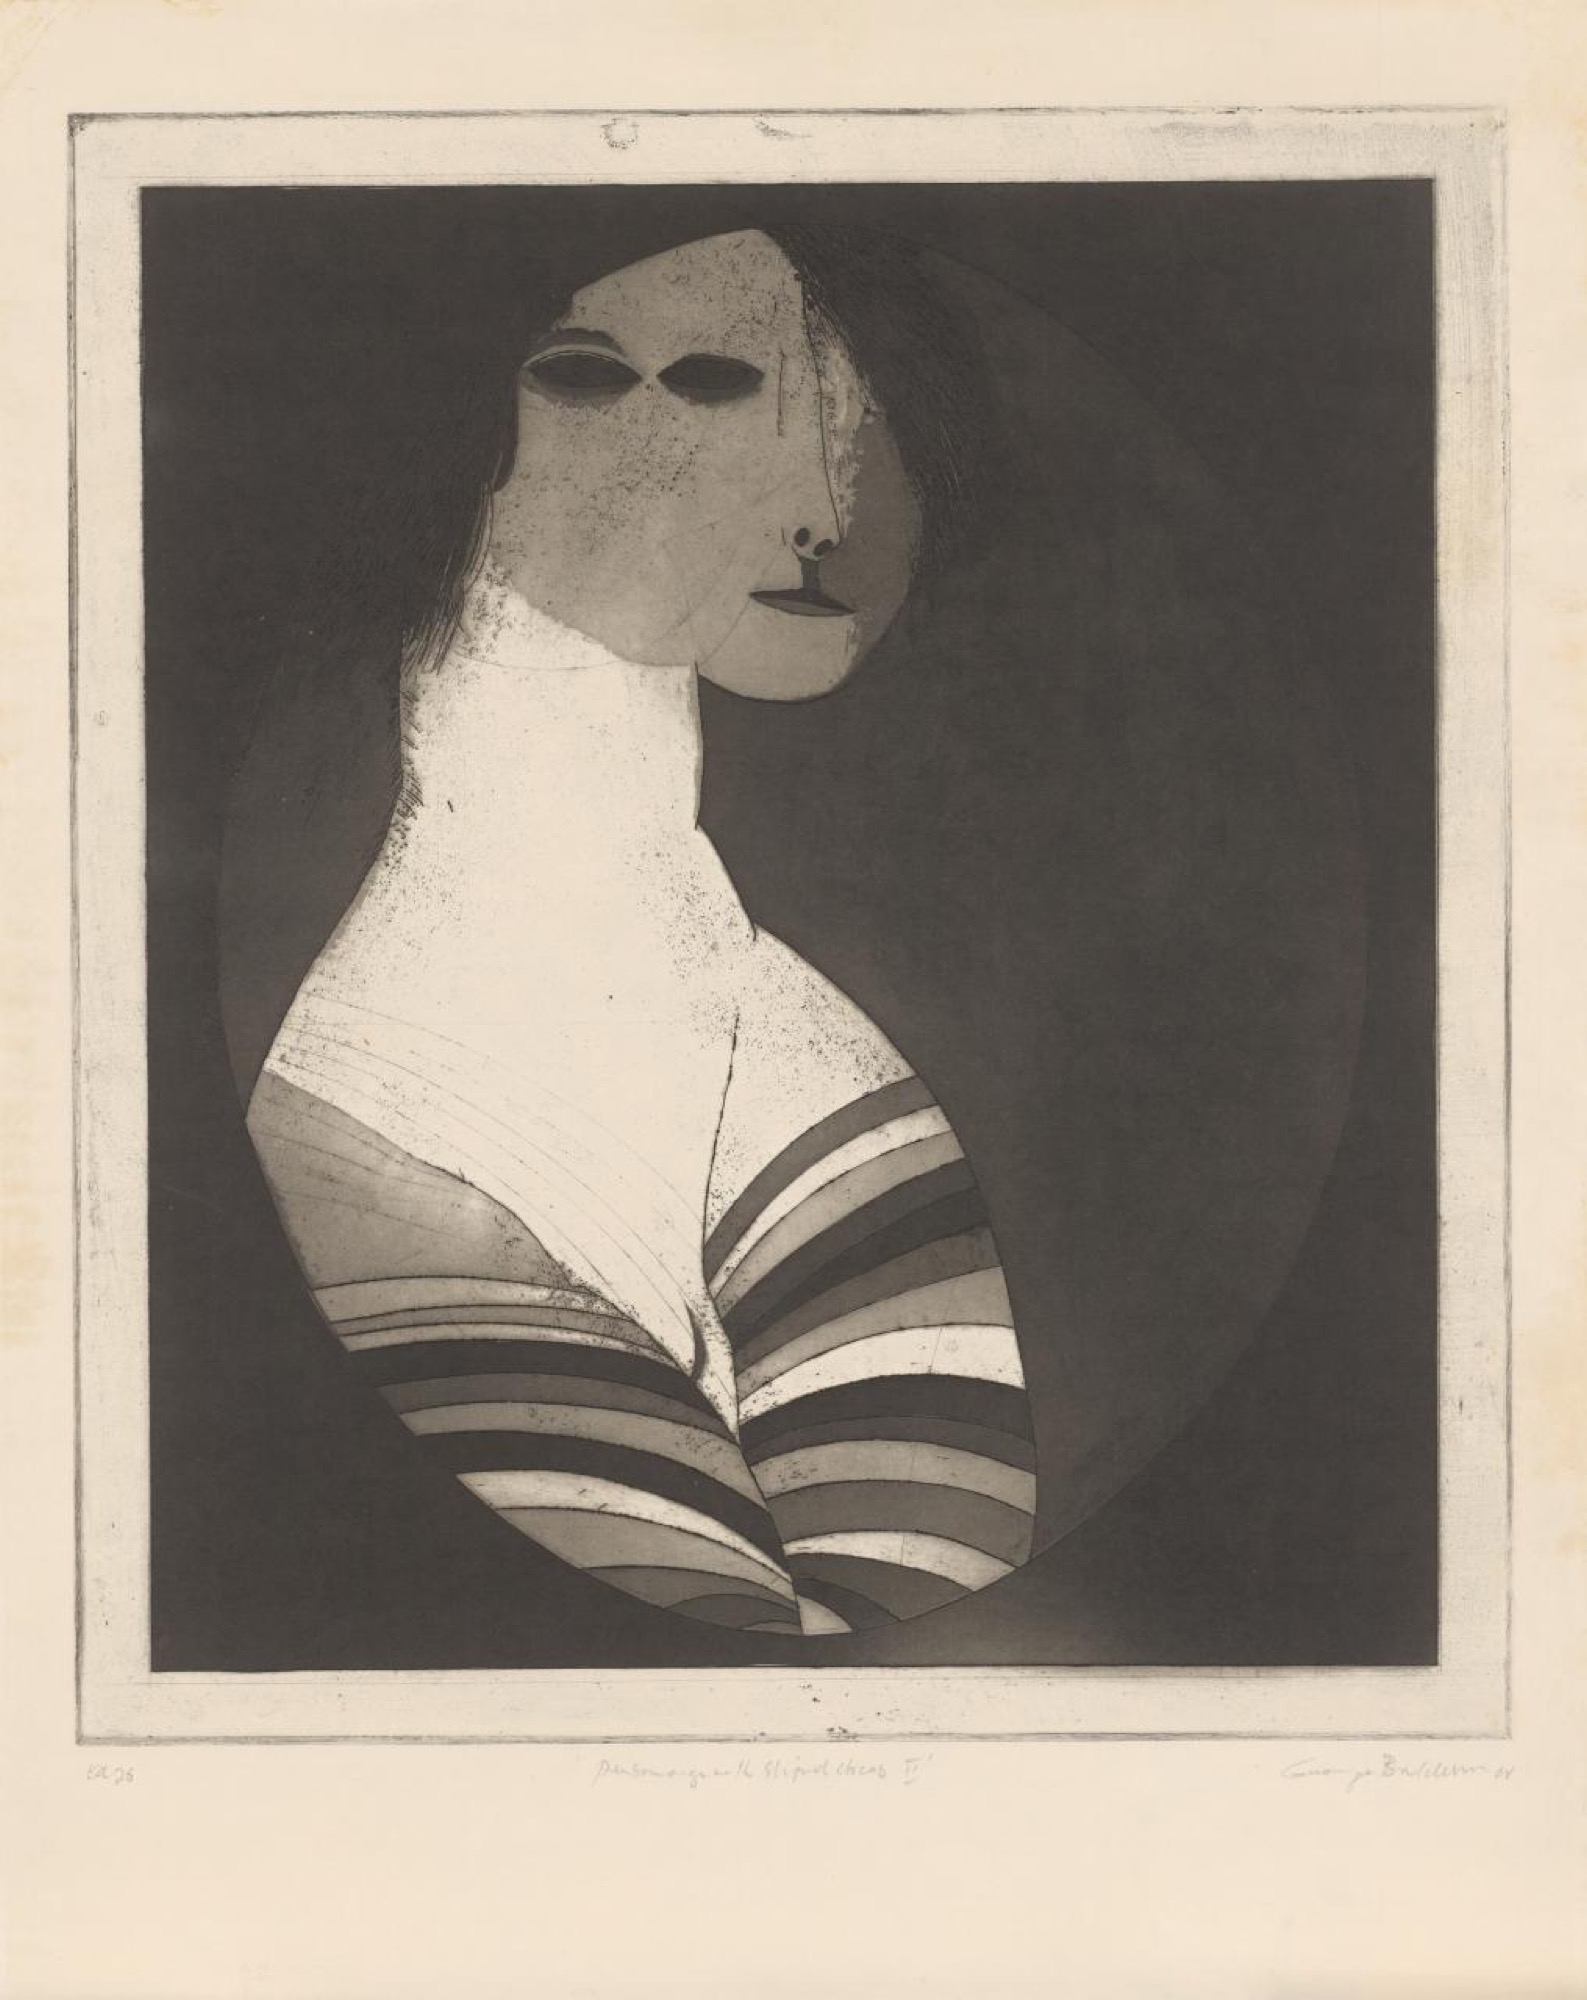 George BALDESSIN, <em>Personage with striped dress II</em>, 1968, etching, aquatint, drypoint, and foul-bite, printed in black ink with plate-tone, on paper on cardboard, 57.5 × 50.5 cm (plate); 70.7 × 56.4 cm (sheet). National Gallery of Victoria, Melbourne, The Joseph Brown Collection. © The Estate of George Baldessin/Licensed by VISCOPY, Australia